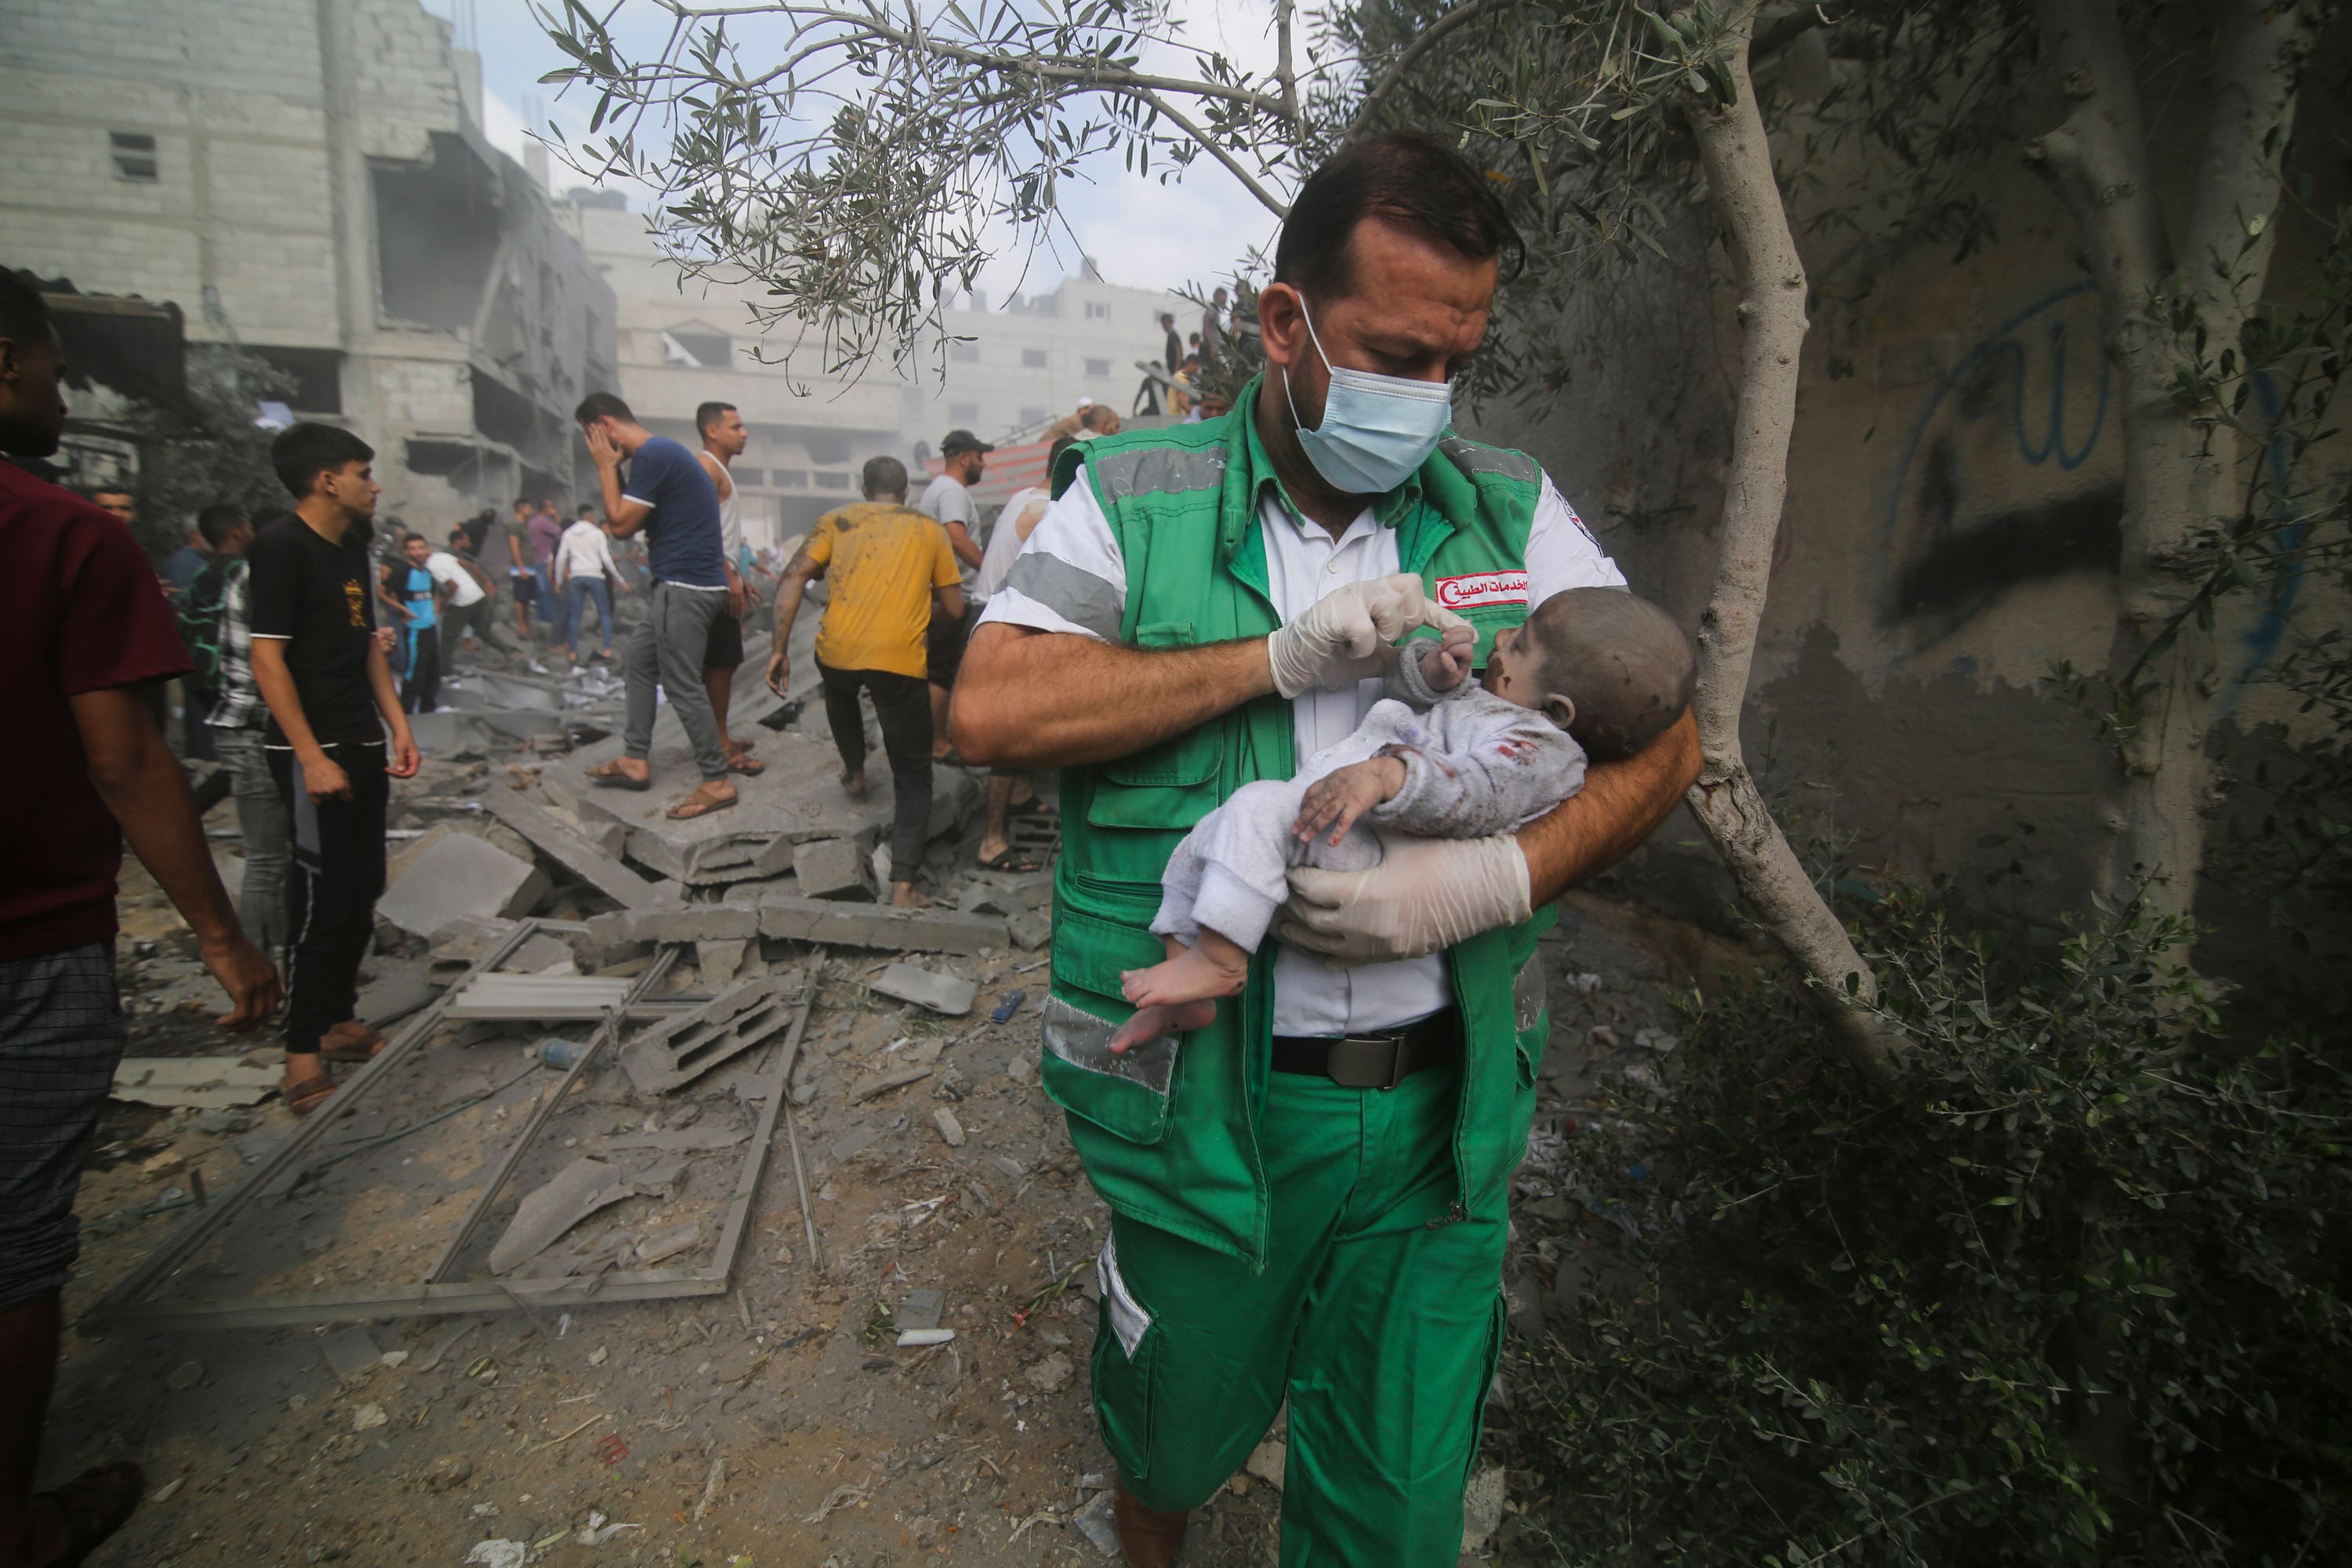 A Palestinian medic carries a baby pulled out of destroyed buildings.